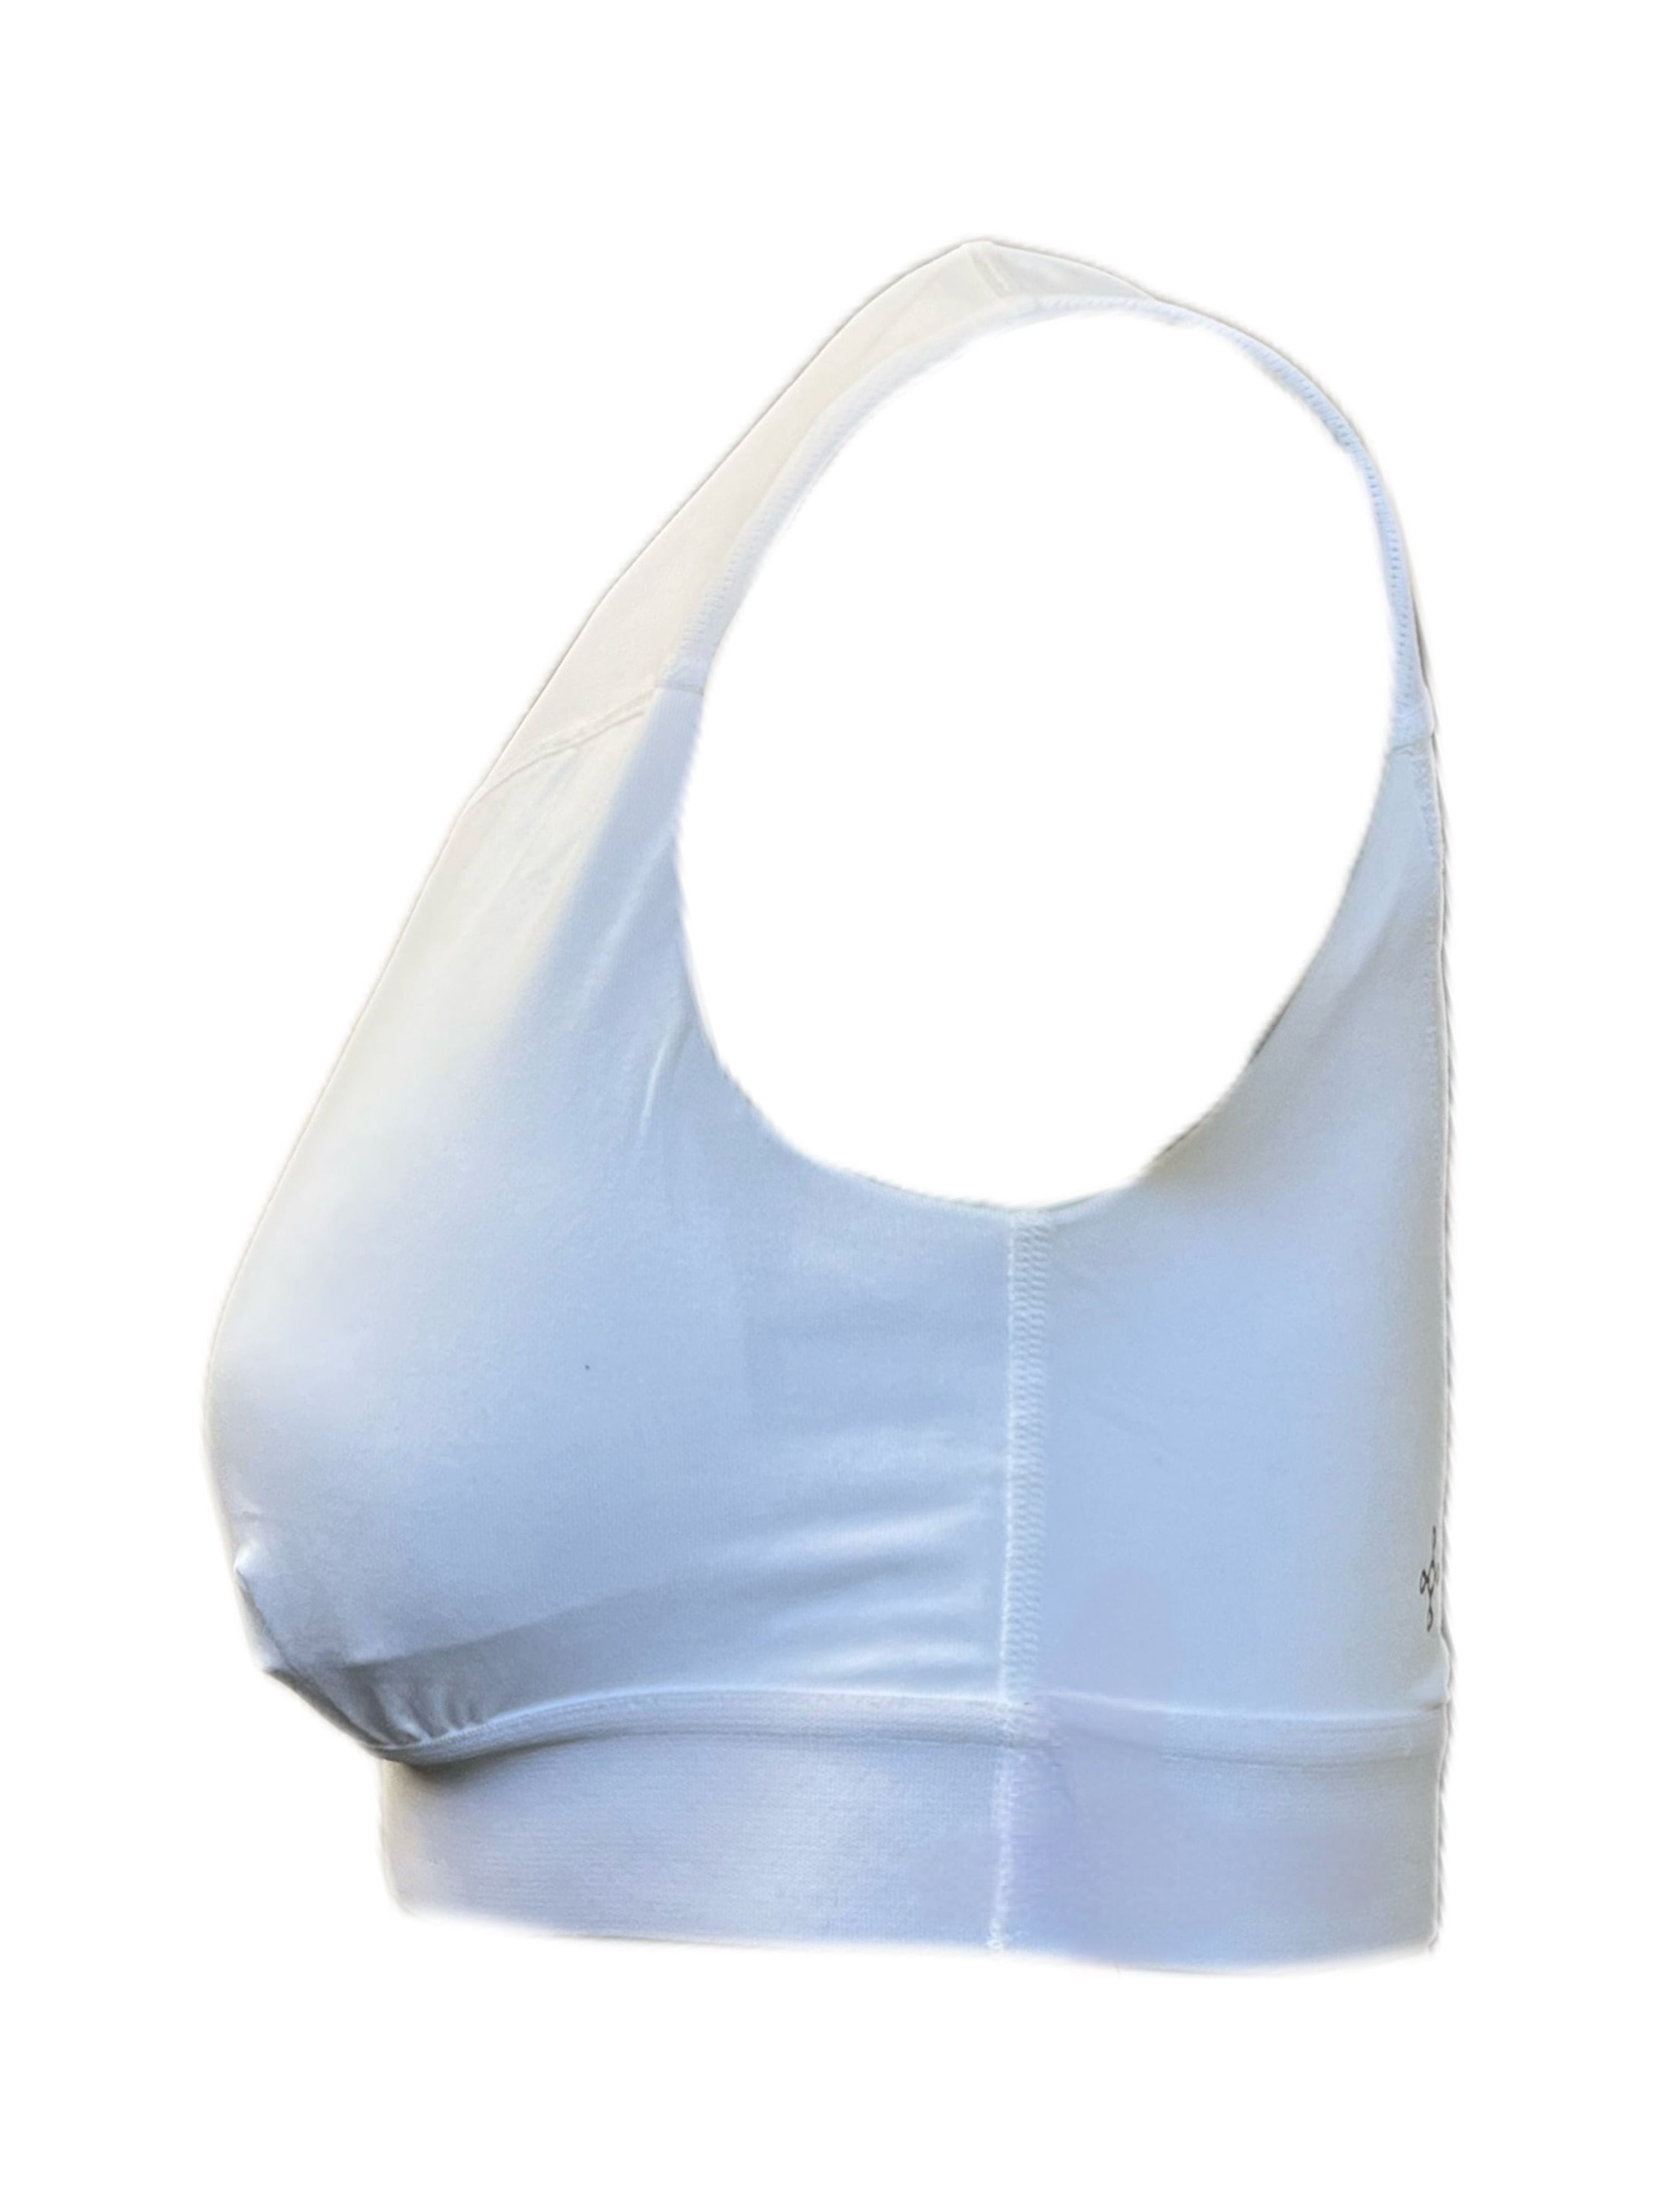 TOMMIE COPPER Womens White Shoulder Support Comfort Bra